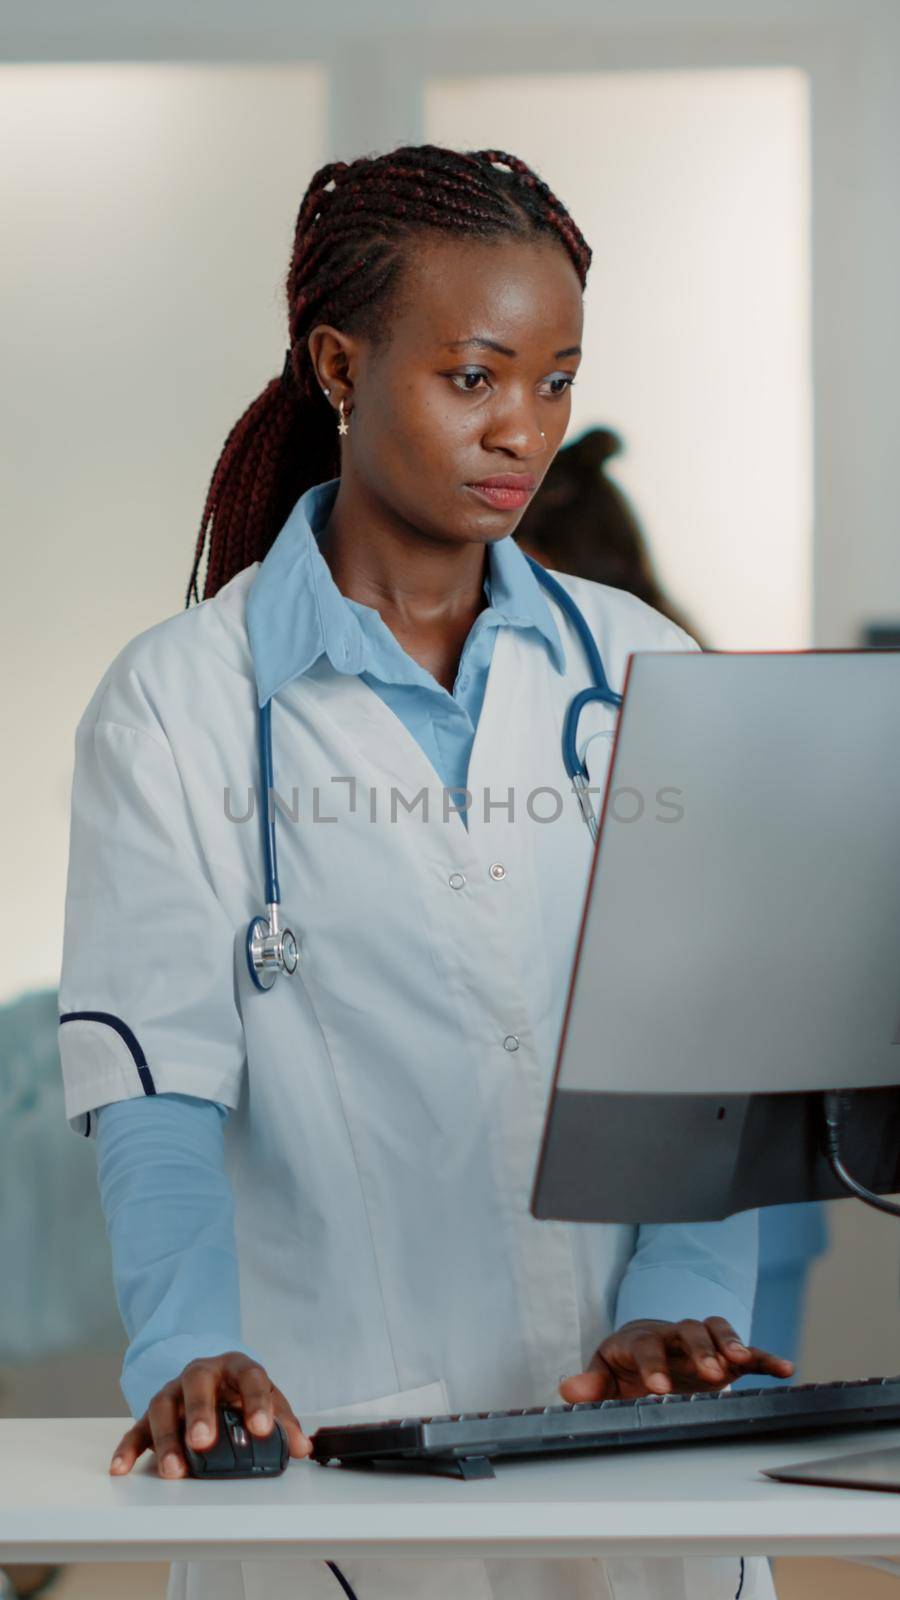 General practitioner with white coat using computer at desk to find medication and treatment against disease. Woman doctor working with technology on monitor to cure sick patient.